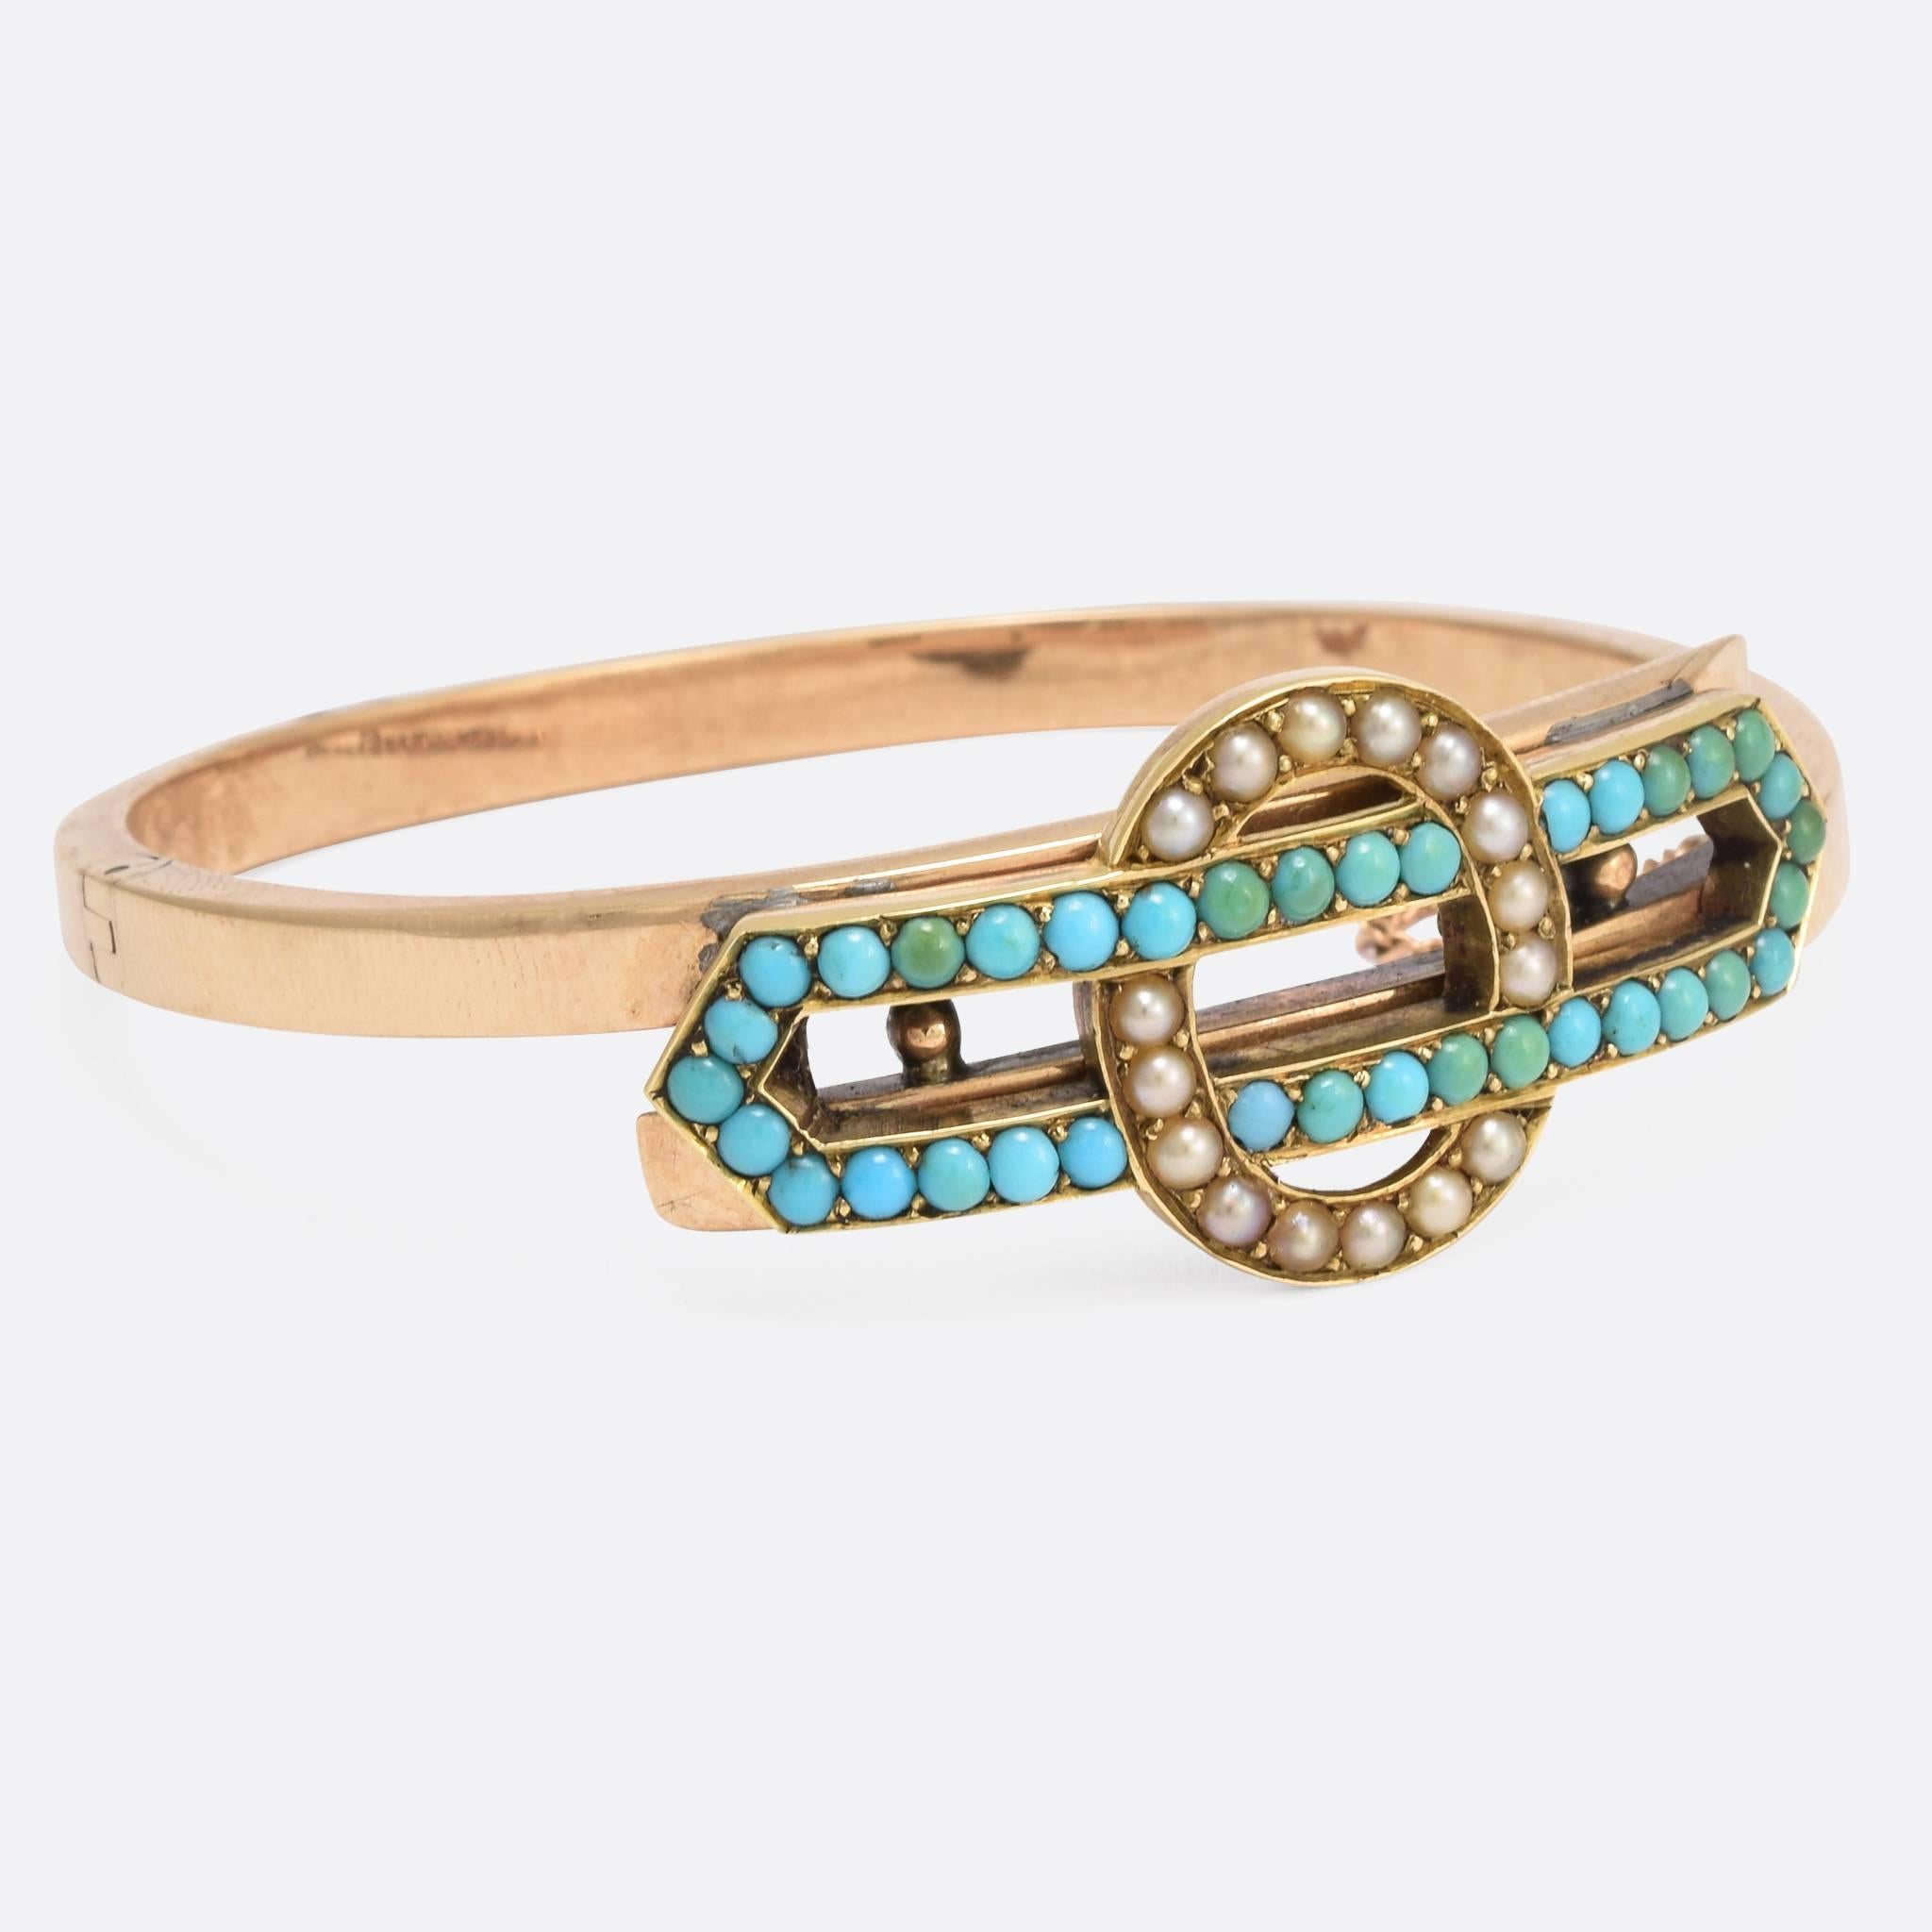 A stylish antique hinged bangle dating to the late Victorian period. The head is modelled as a stylised Infinity Knot, and set with turquoise cabochons and split pearls. Crafted from 15k gold throughout, this lovely piece is very typical of the era.